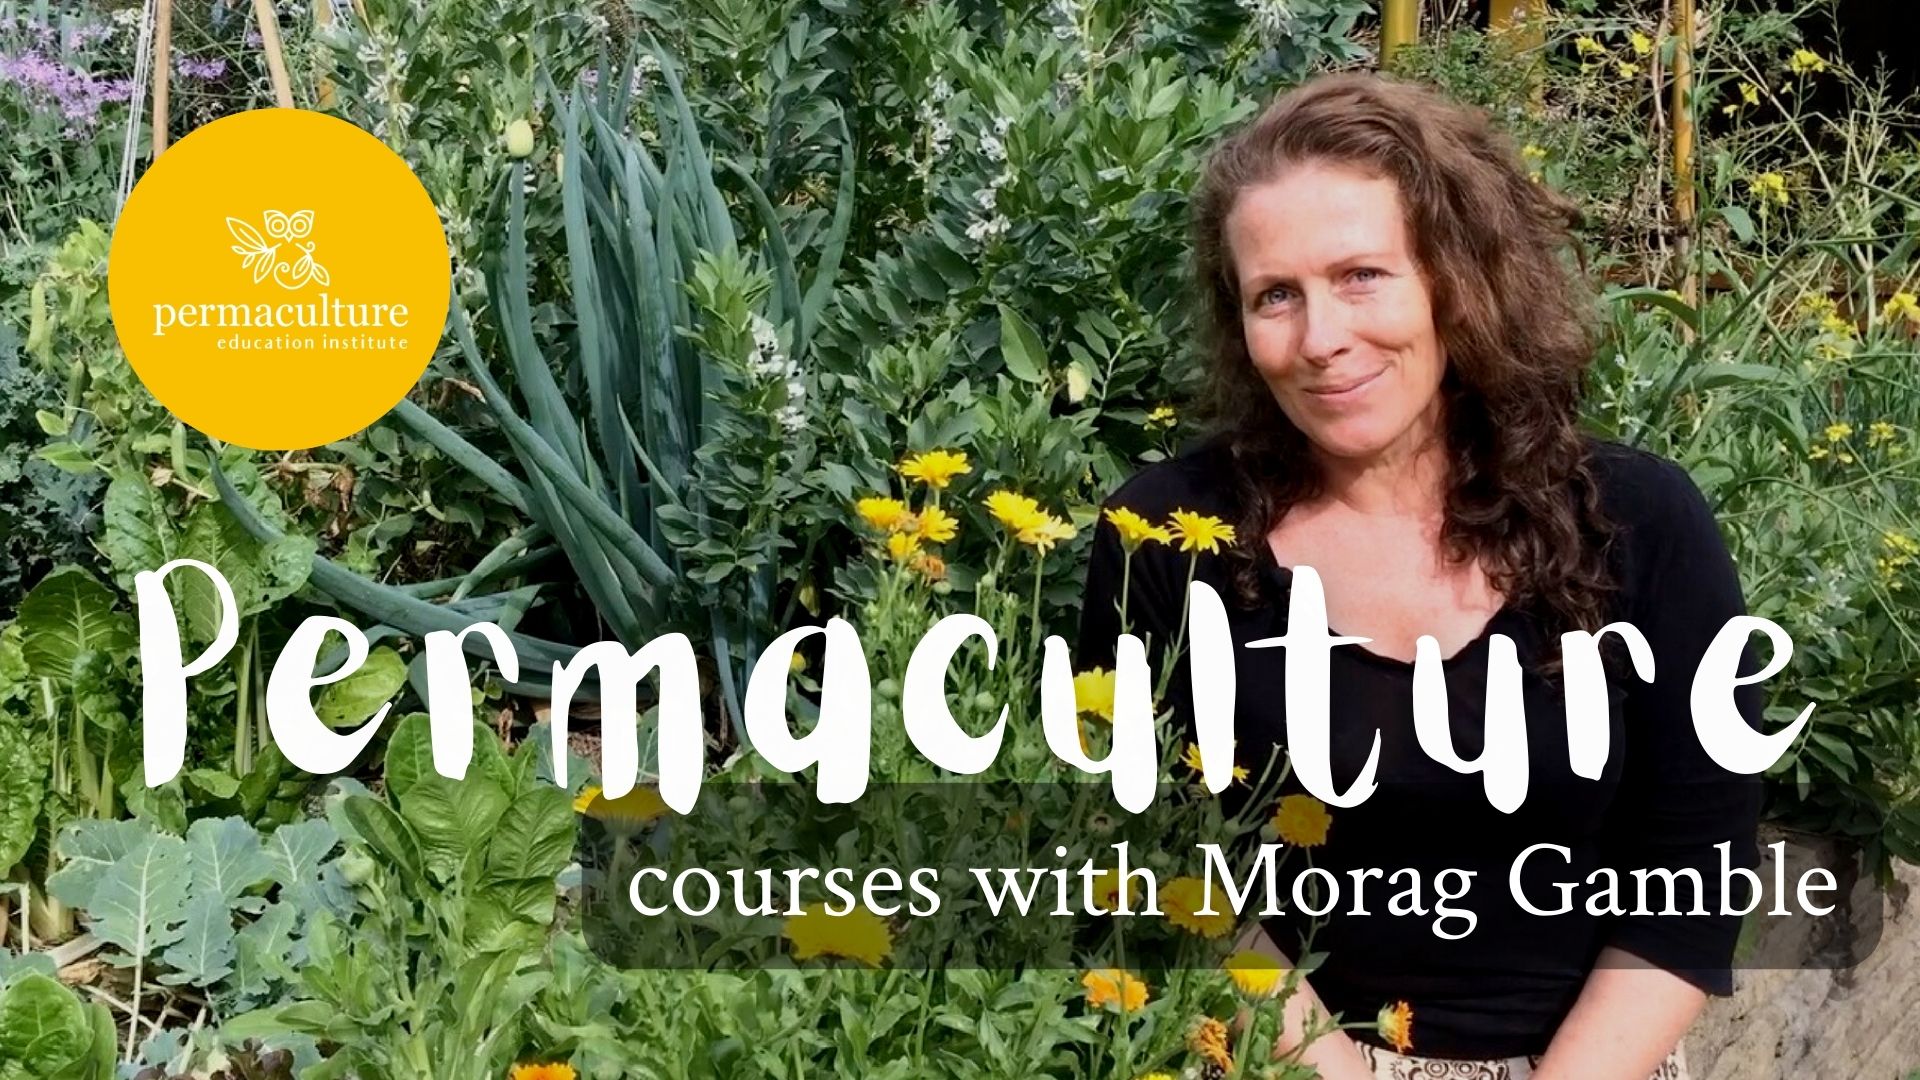 Permaculture courses with Morag Gamble